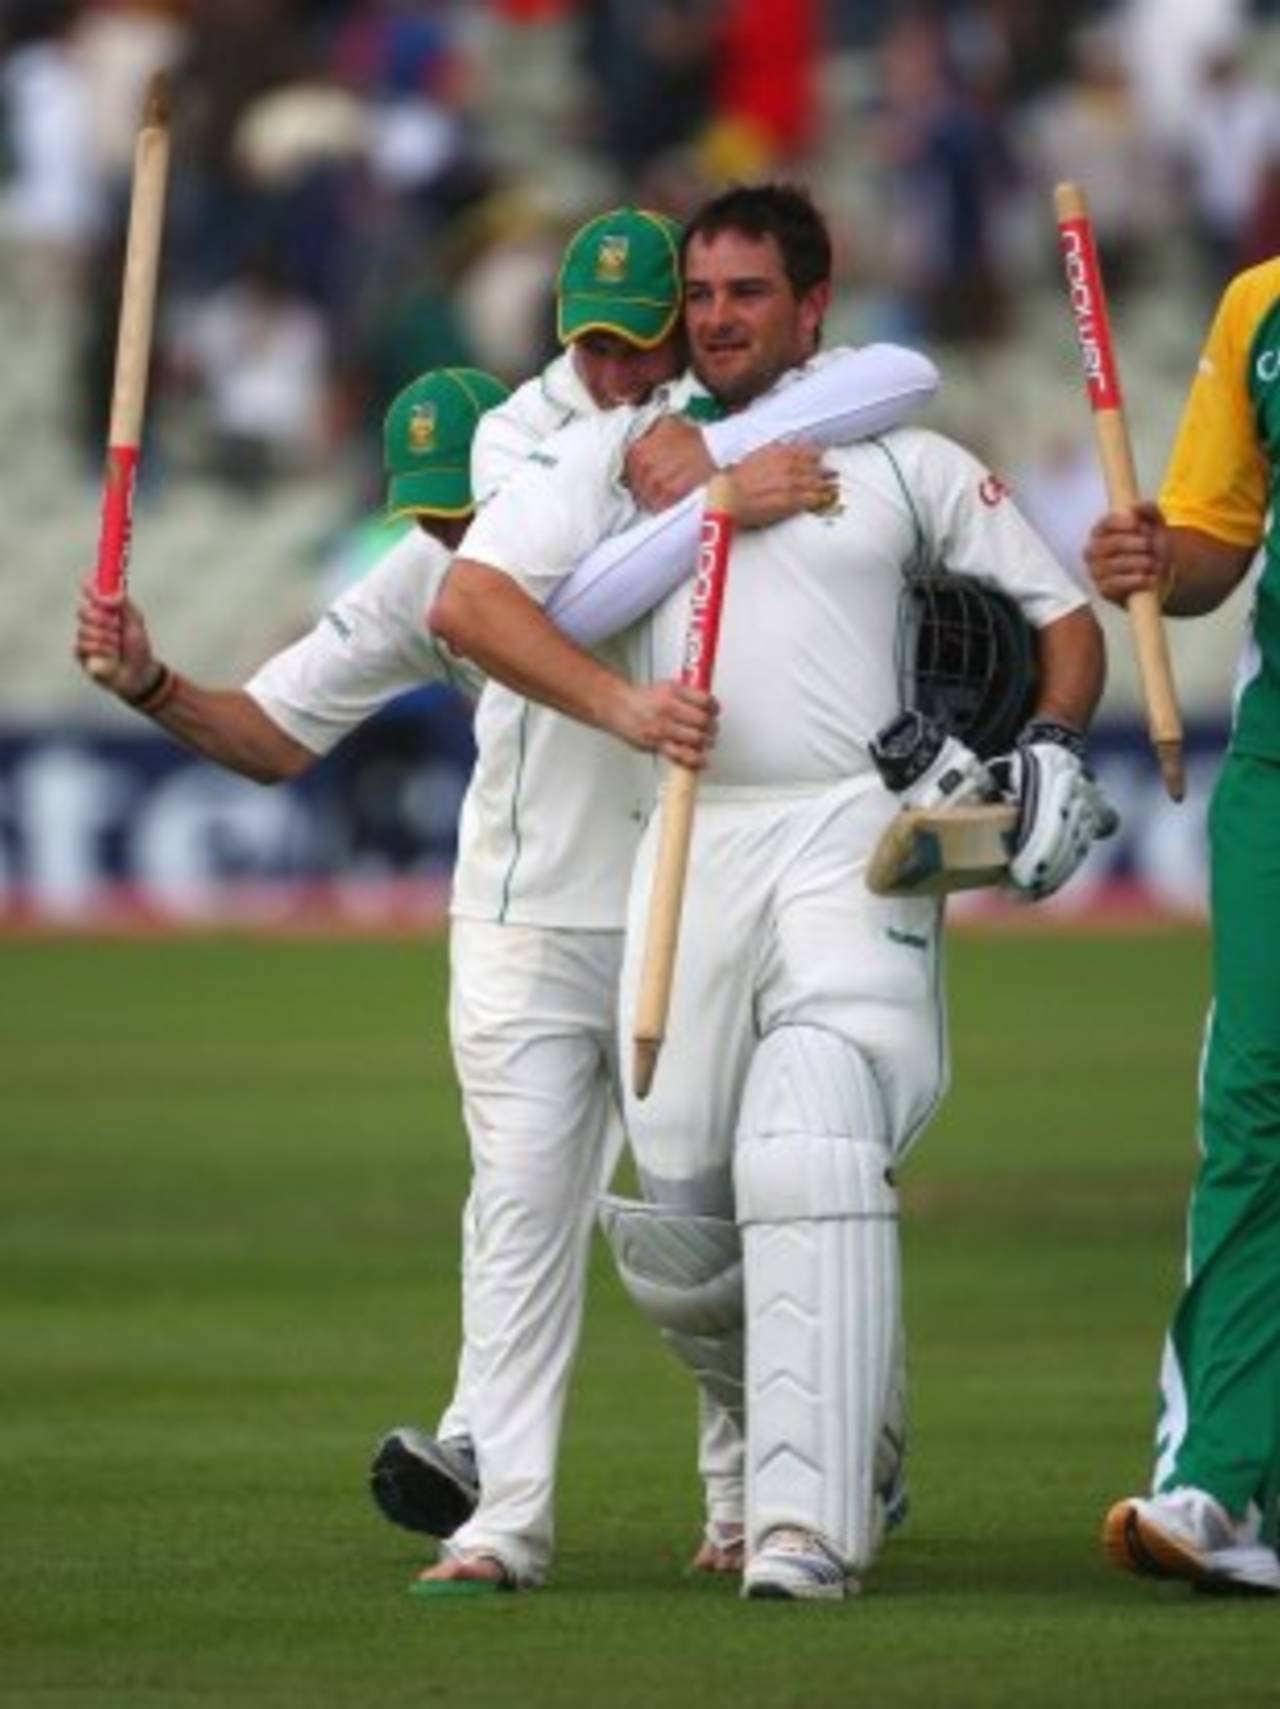 Mark Boucher was not out on 45 leading South Africa to their first series victory in England since 1965, England v South Africa, 3rd Test, Edgbaston, August 2, 2008